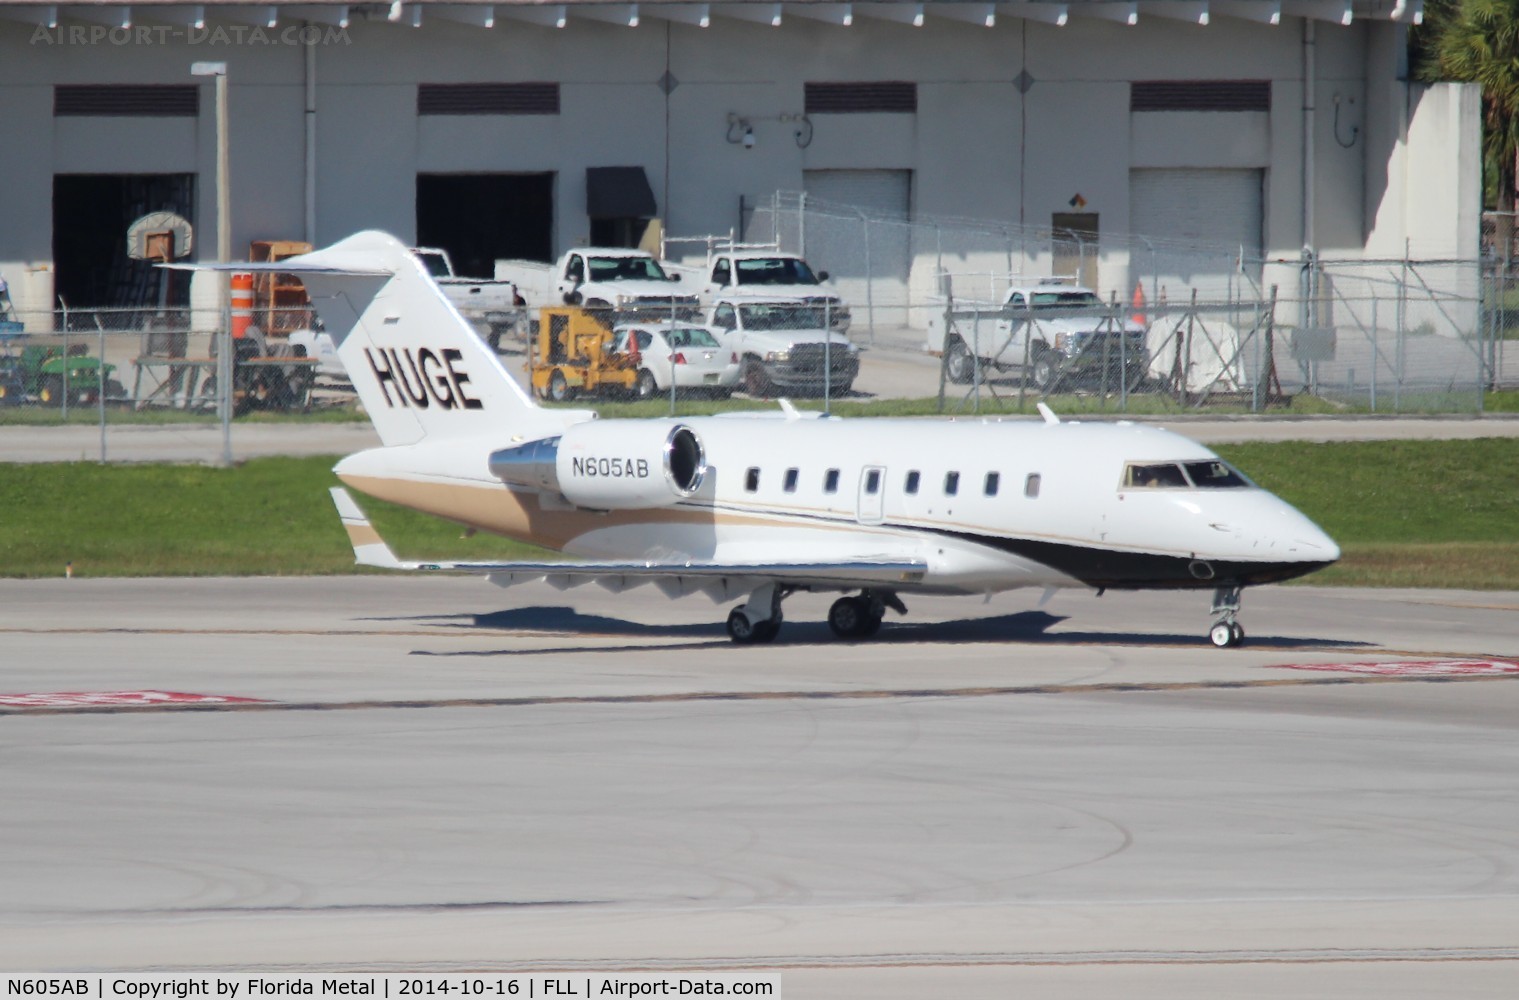 N605AB, 2009 Bombardier Challenger 605 (CL-600-2B16) C/N 5792, Challenger 605